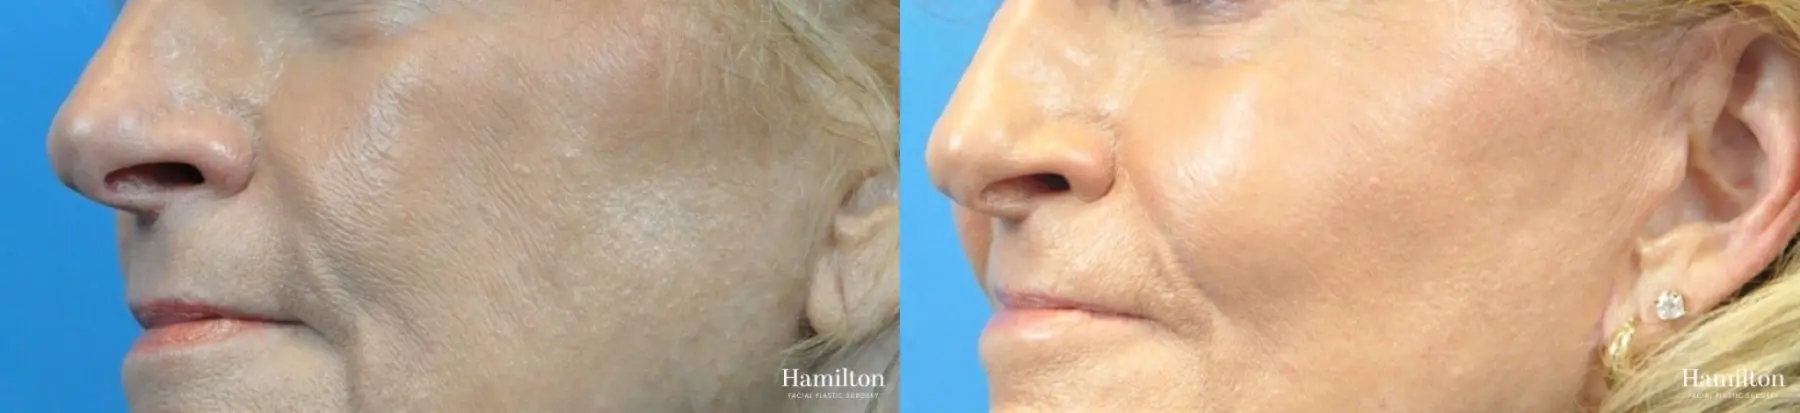 Cheek Augmentation: Patient 1 - Before and After 2